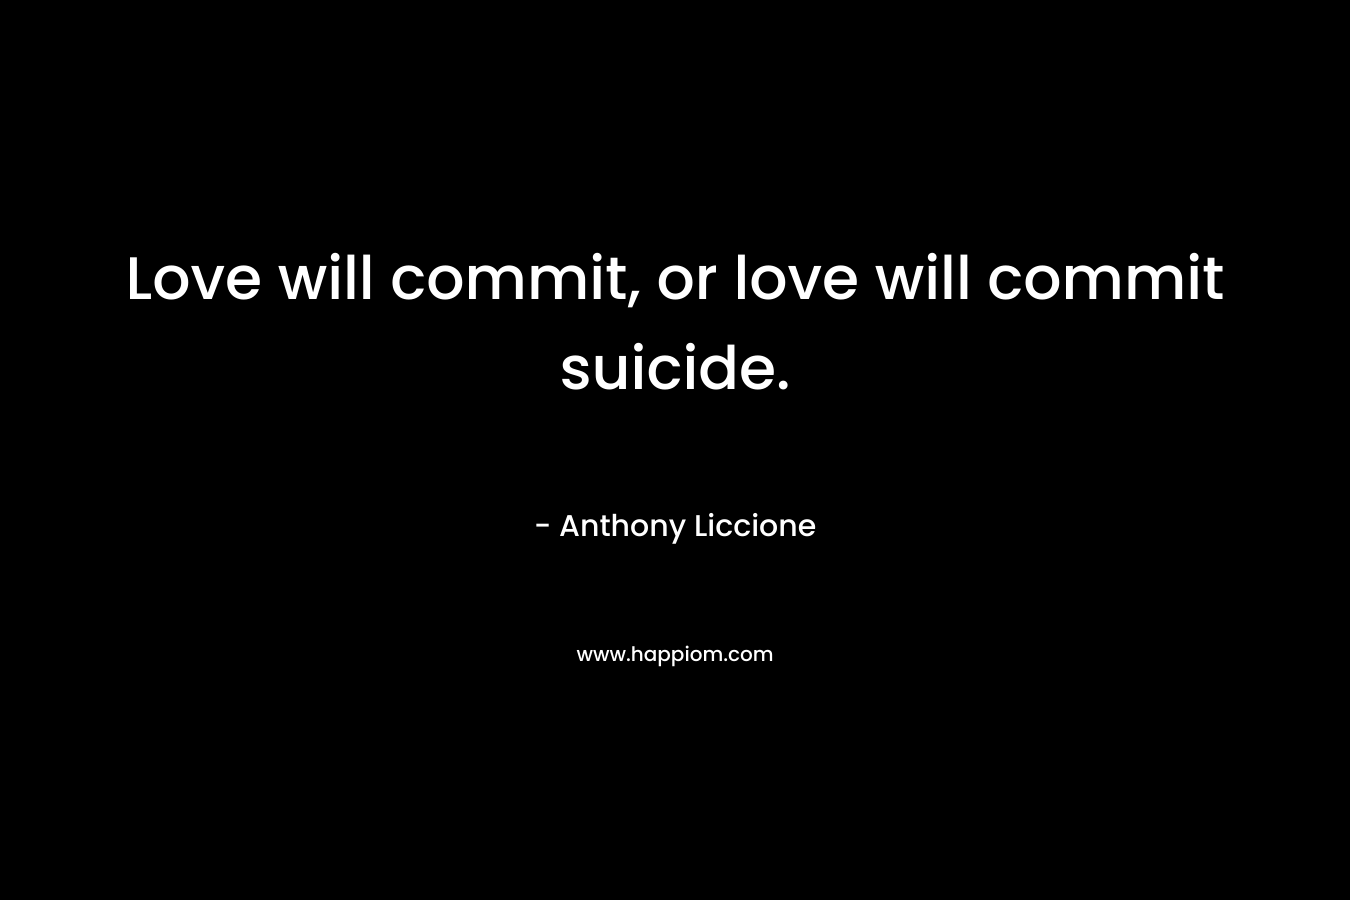 Love will commit, or love will commit suicide.